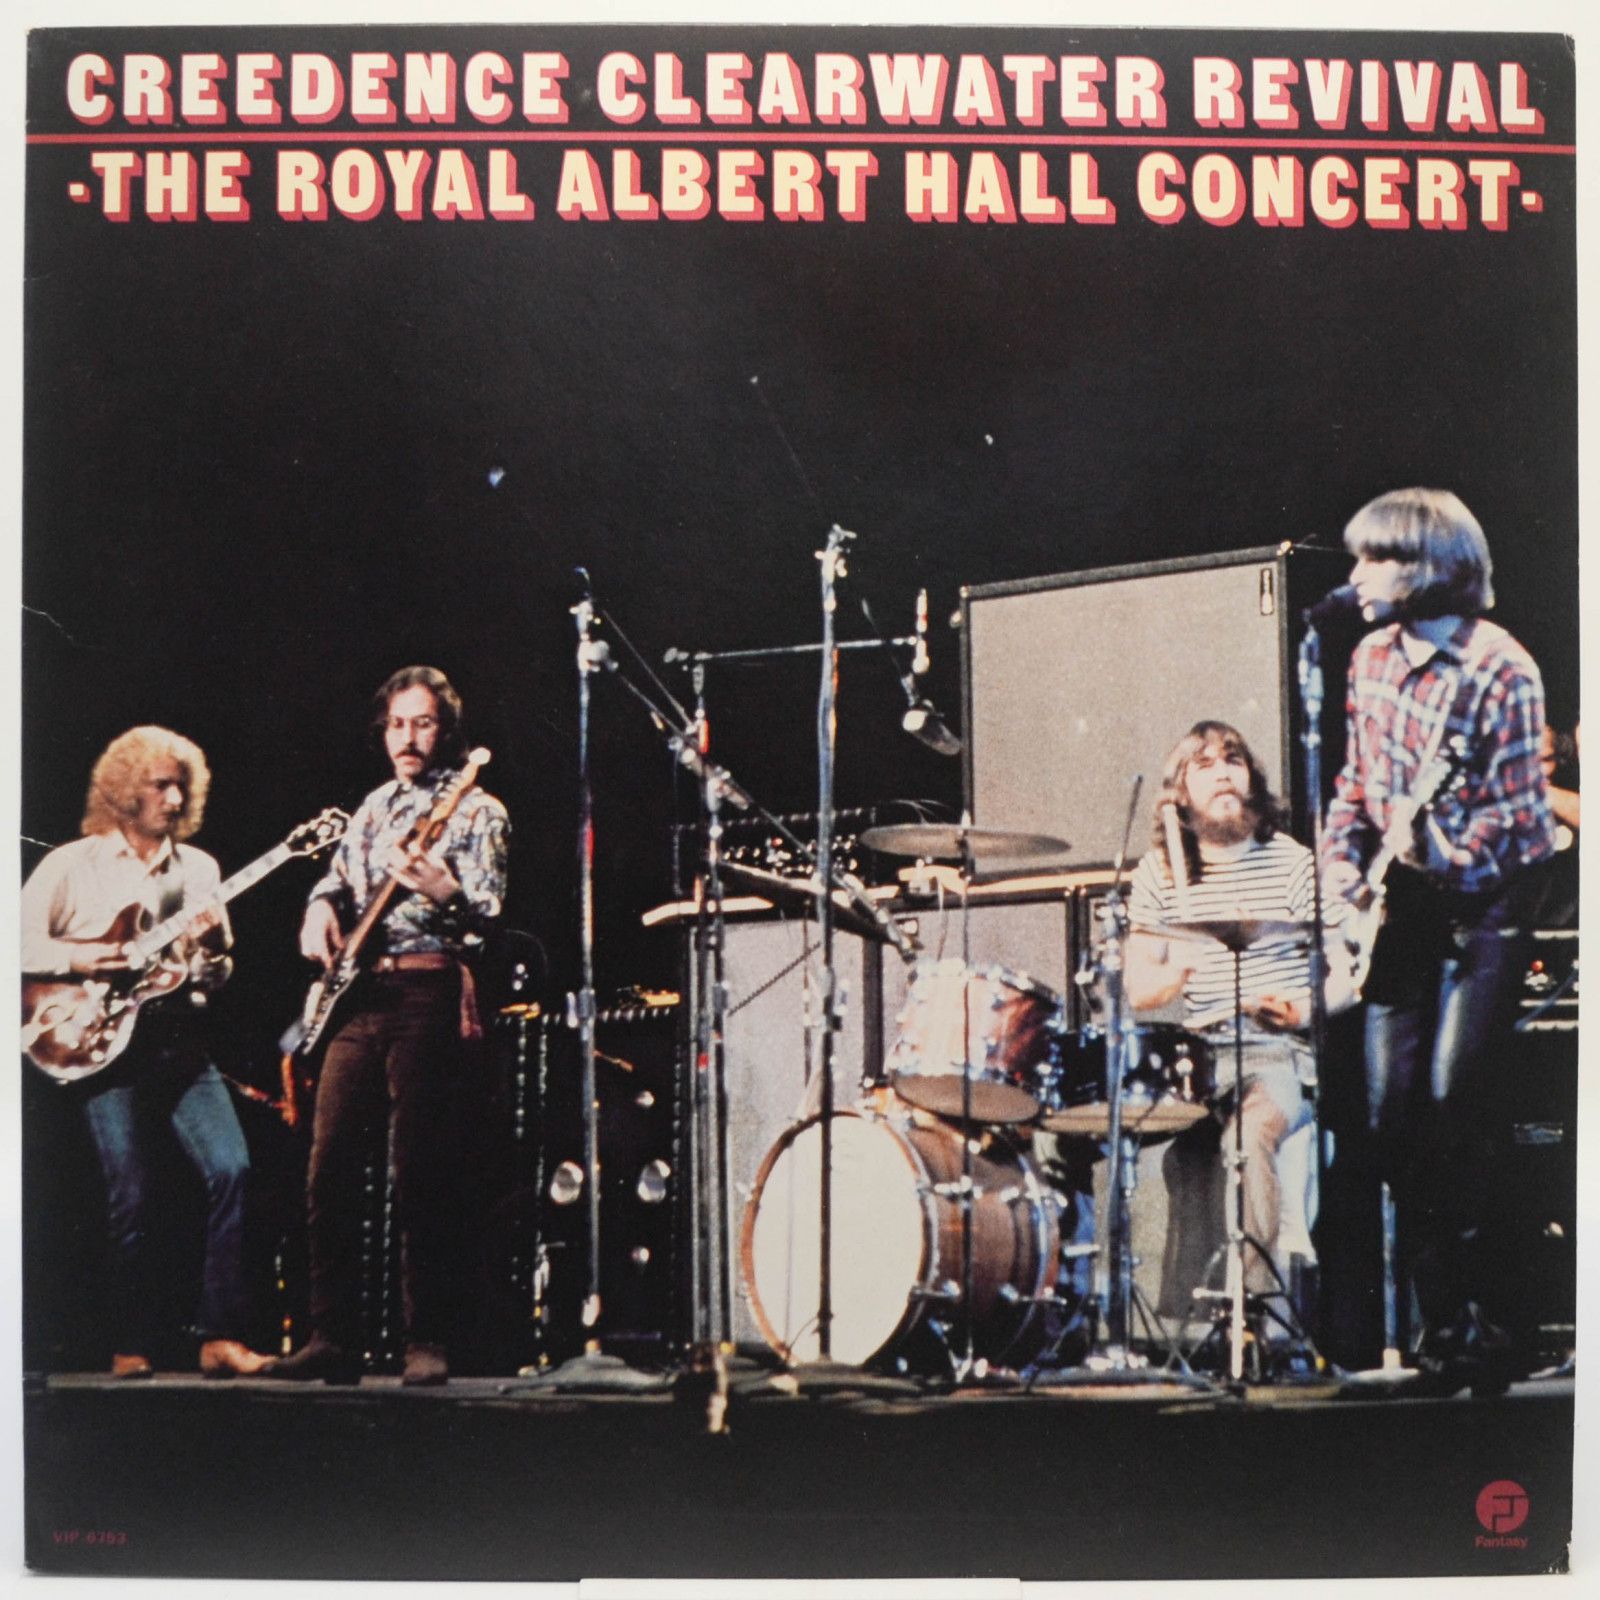 Creedence Clearwater Revival — The Royal Albert Hall Concert, 1981